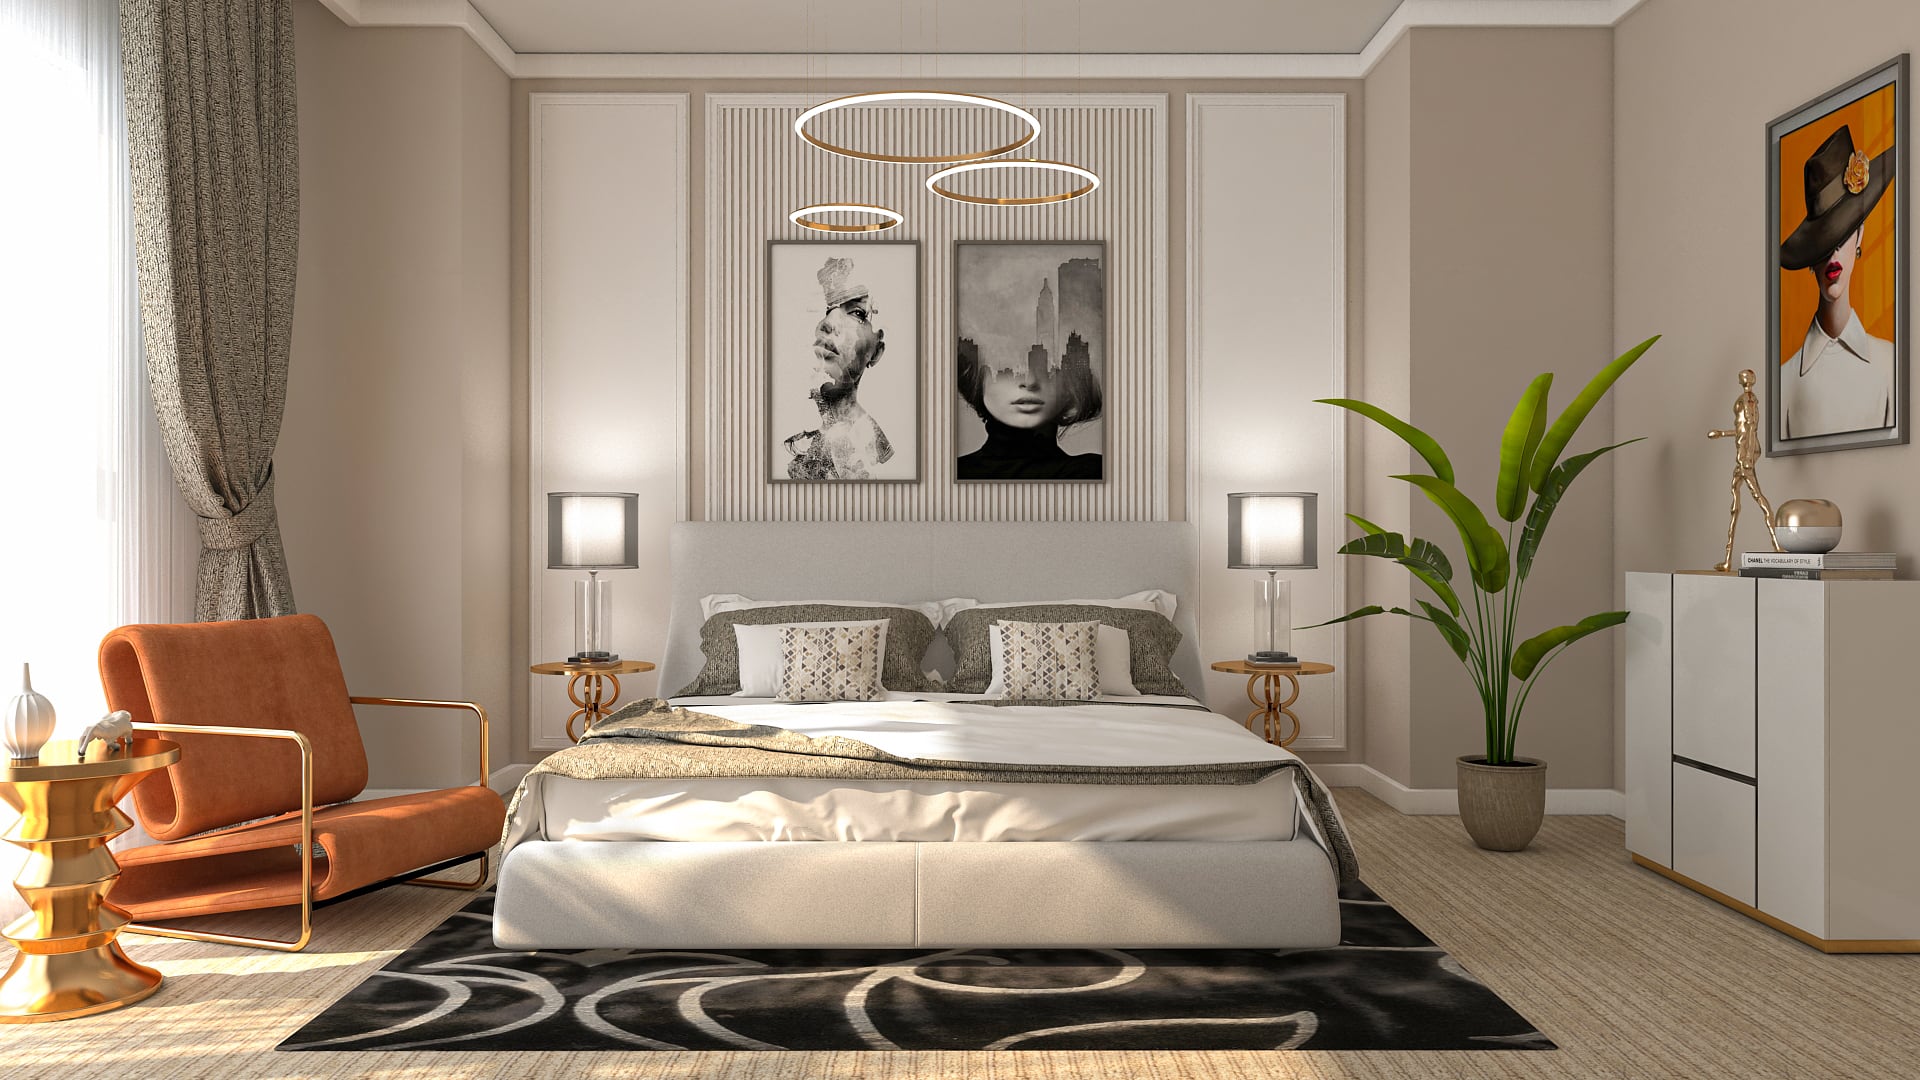 A modern take on retro glamour in bedroom decor ideas for 2023 by Homilo